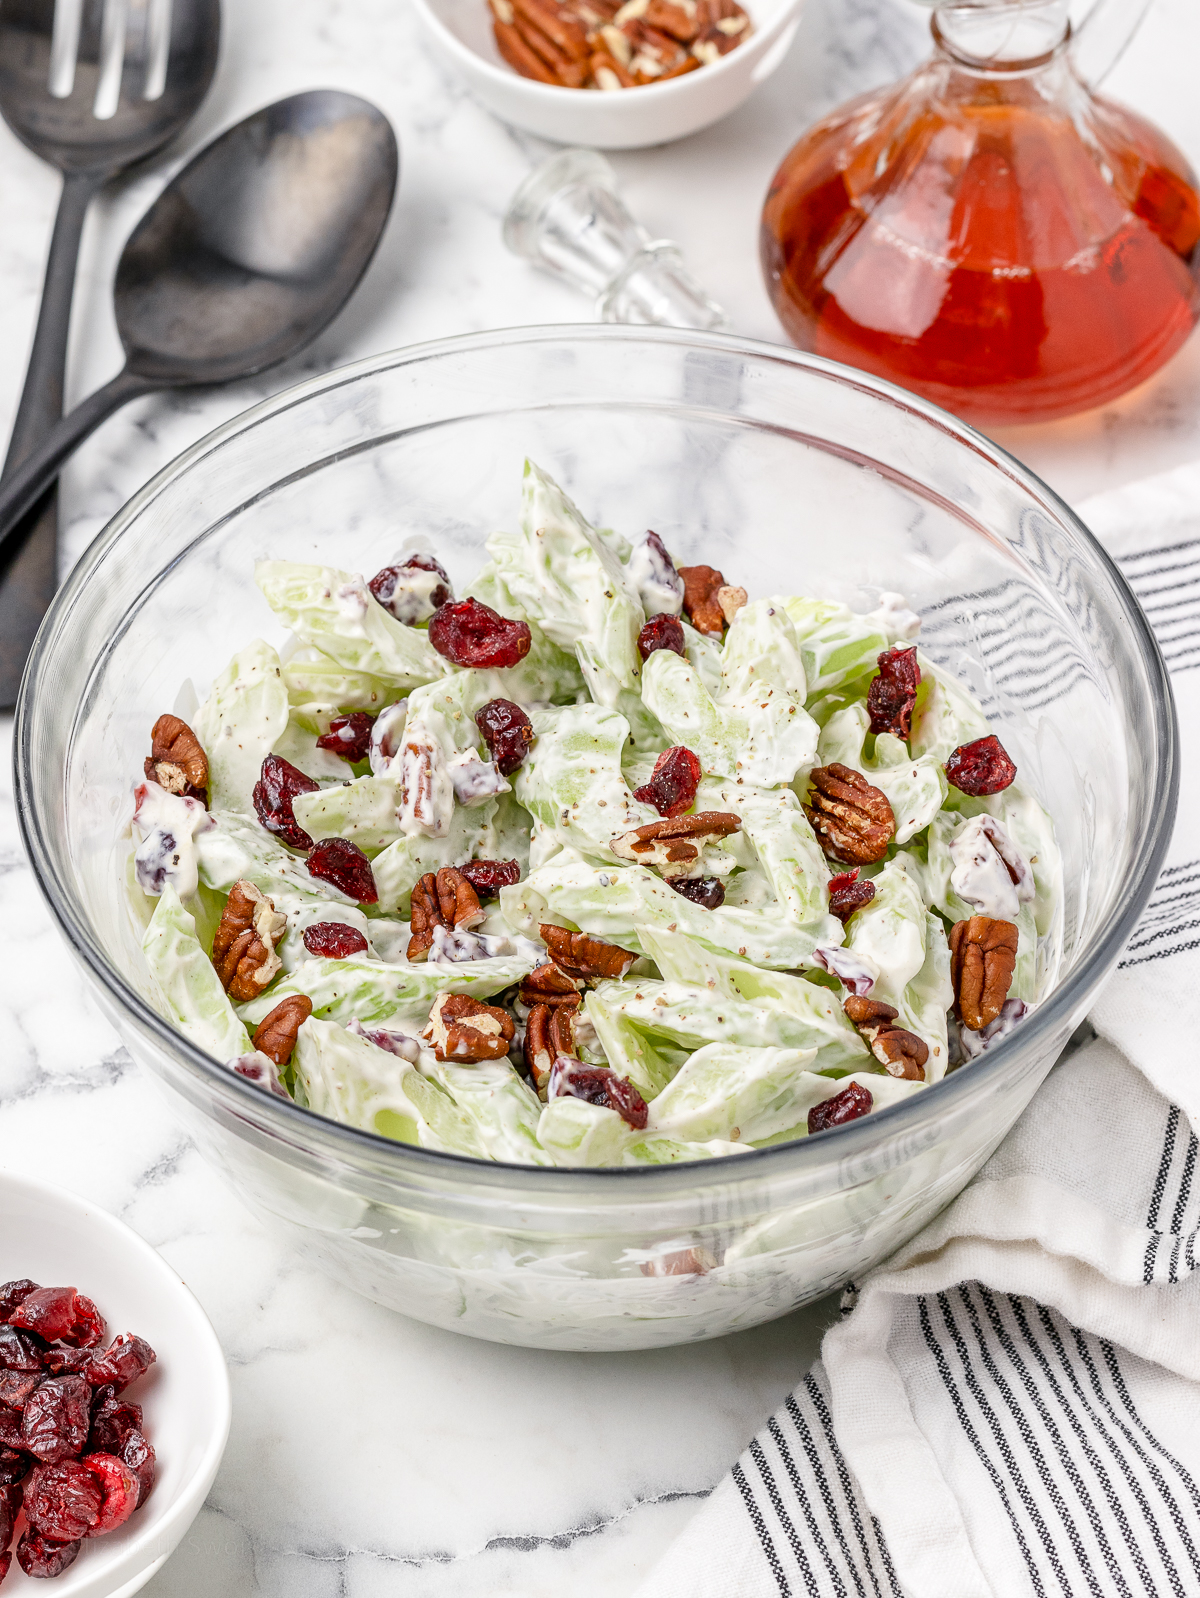 Creamy Salad with celery, toasted pecans, and dried cranberries. Large serving spoons on the side ready for scooping.